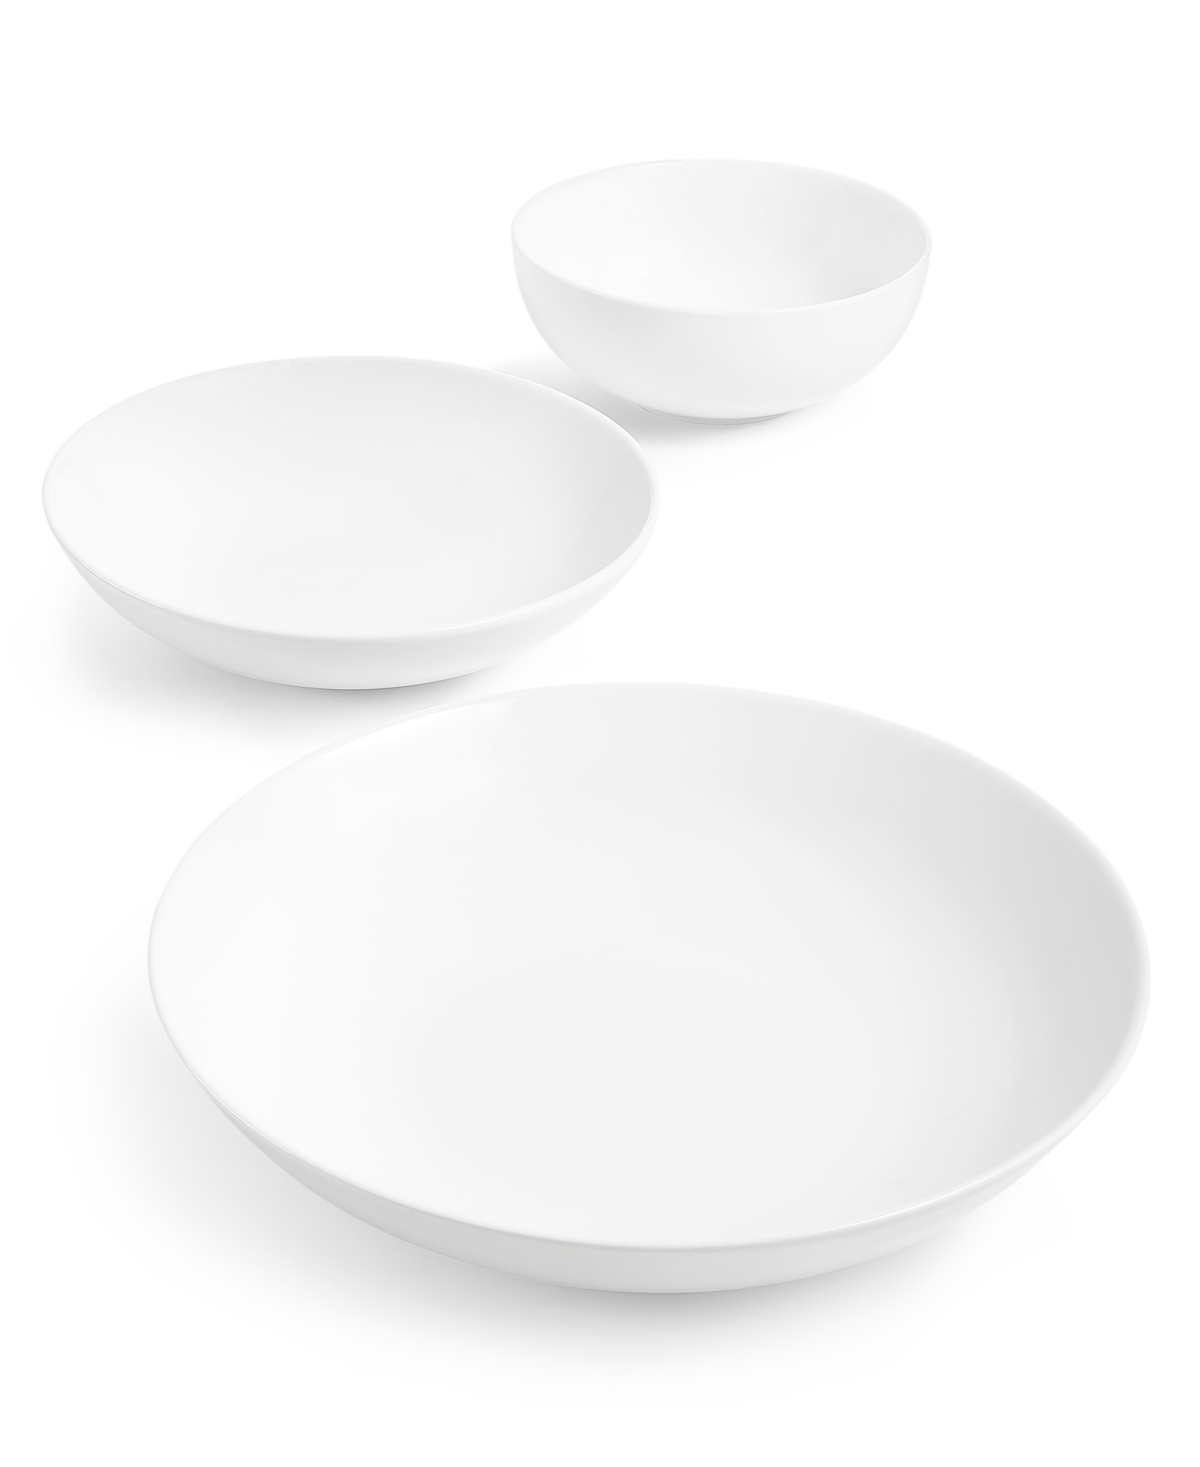 12 Pc. All Bowl Dinnerware Set, Service for 4, Created for Macy's - White